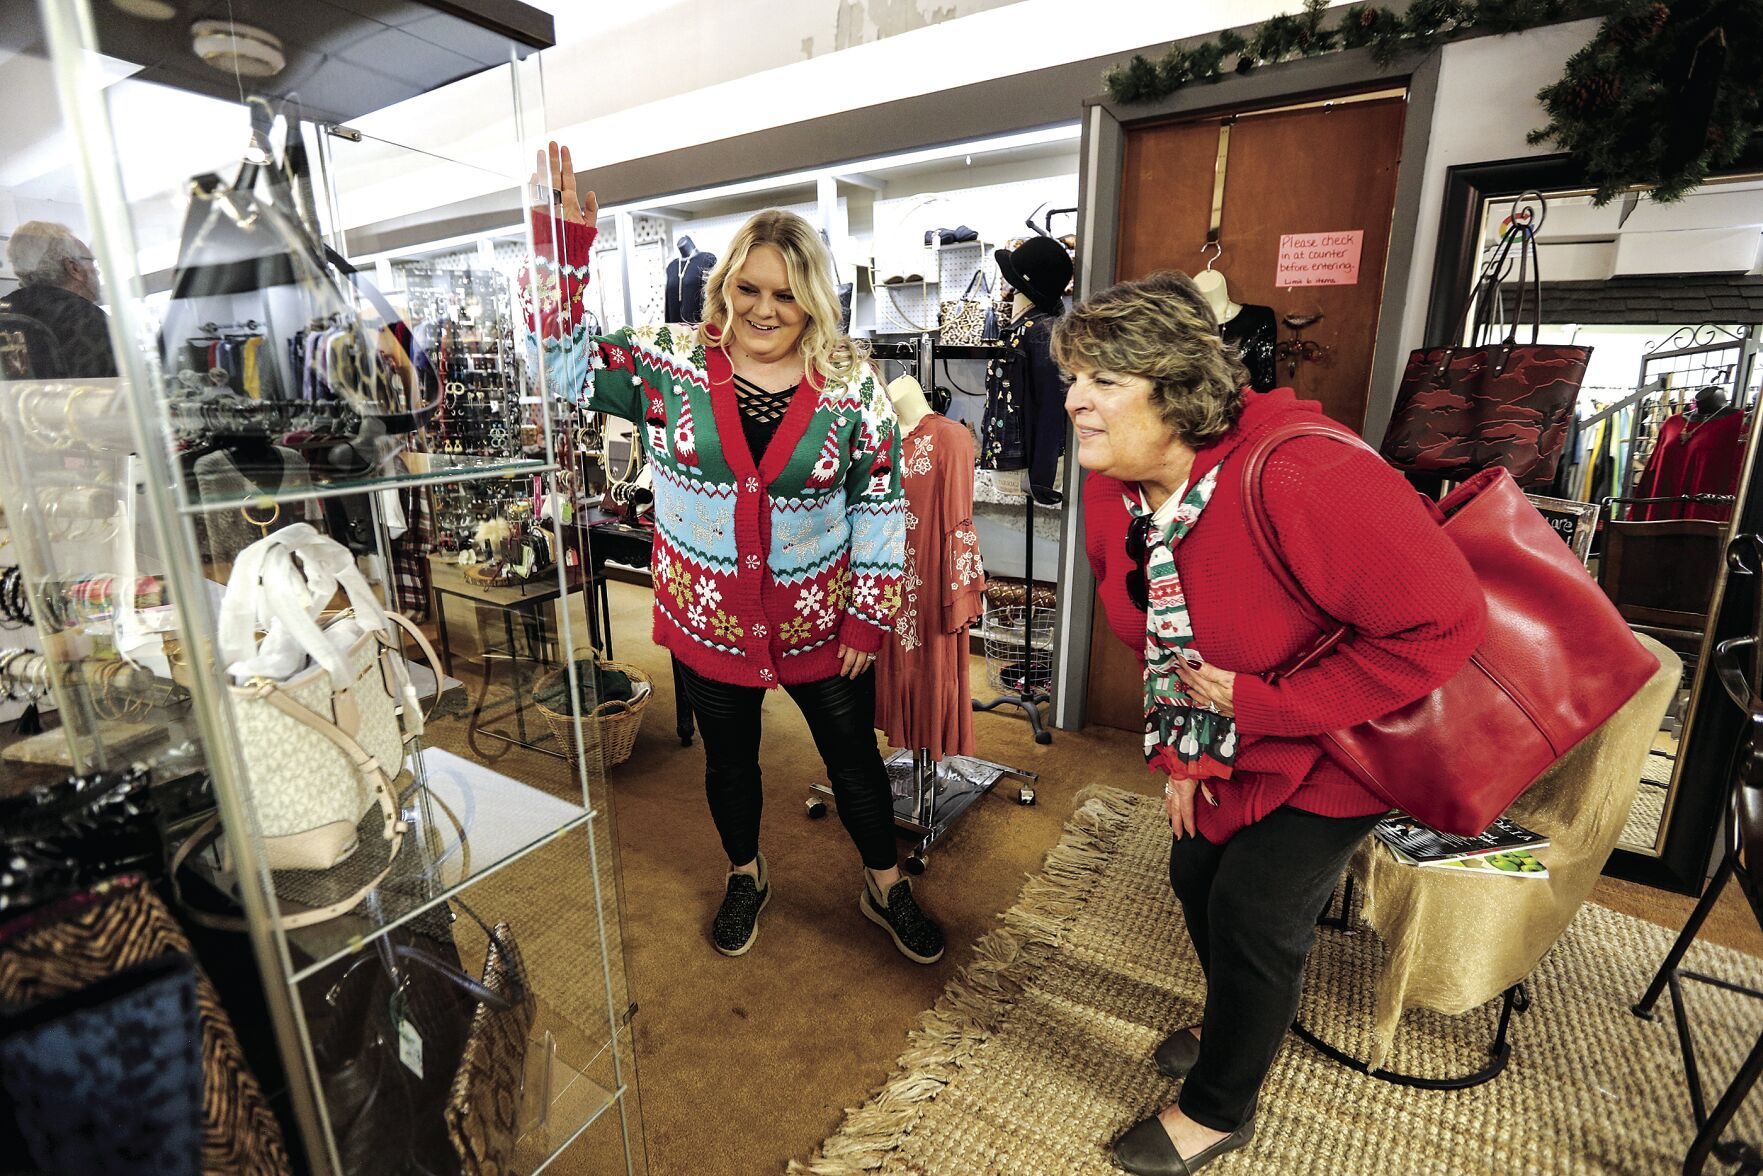 Gabrielle Soppe (left), Owner of Repeats Consignment, shows LaDawn Hankins, of Waterloo, Iowa, some of the purses for sale at the store in Manchester, Iowa, on Thursday.    PHOTO CREDIT: Dave Kettering